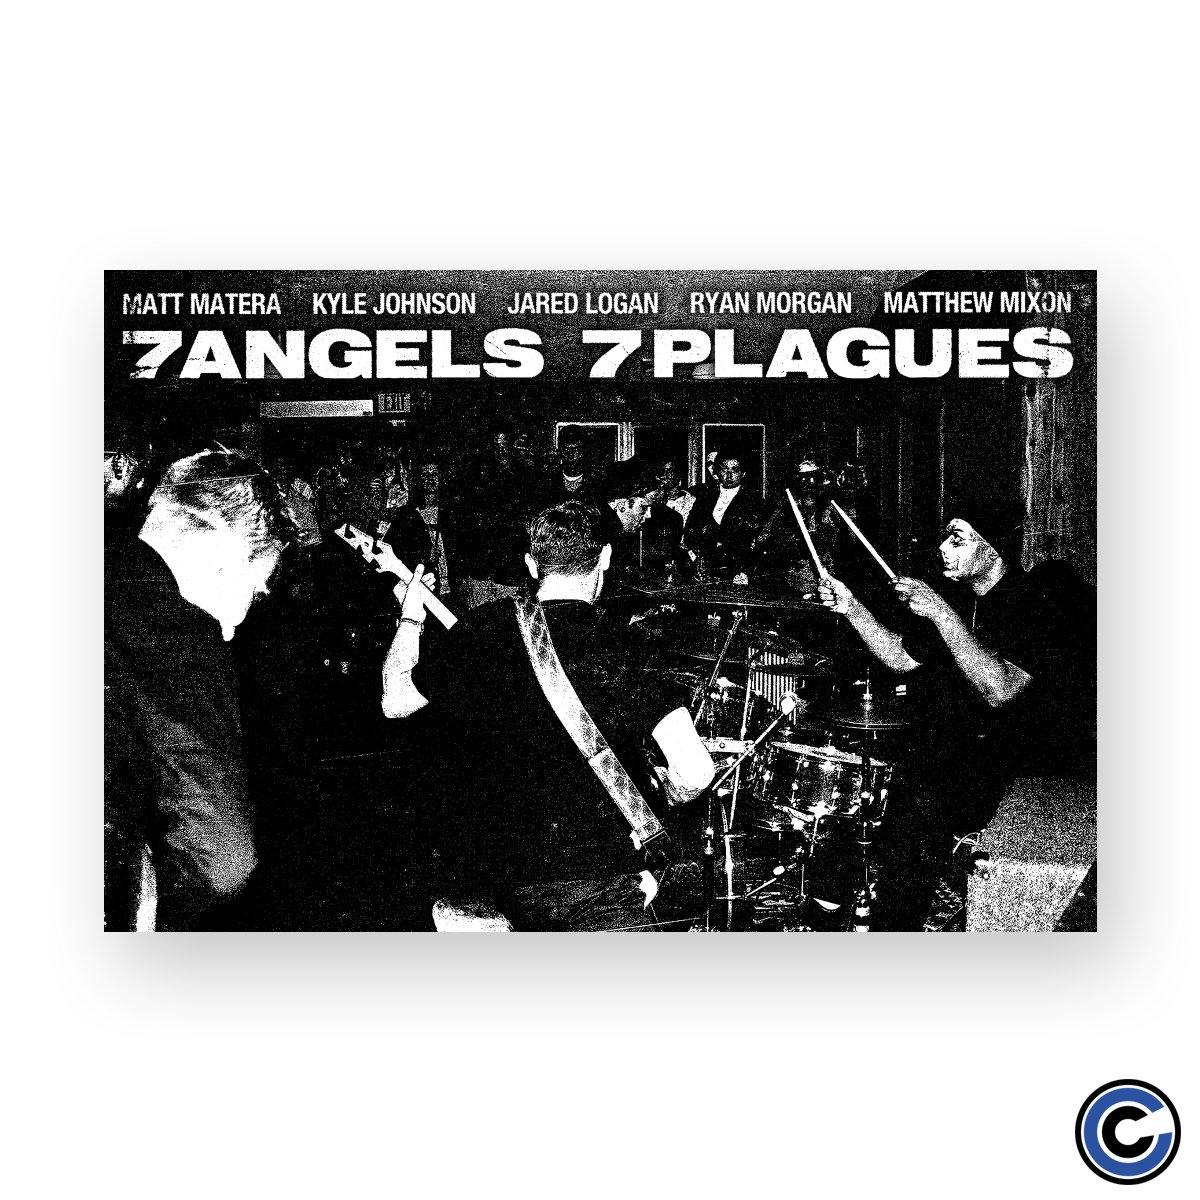 Buy – 7 Angels 7 Plagues "Live" Poster – Band & Music Merch – Cold Cuts Merch